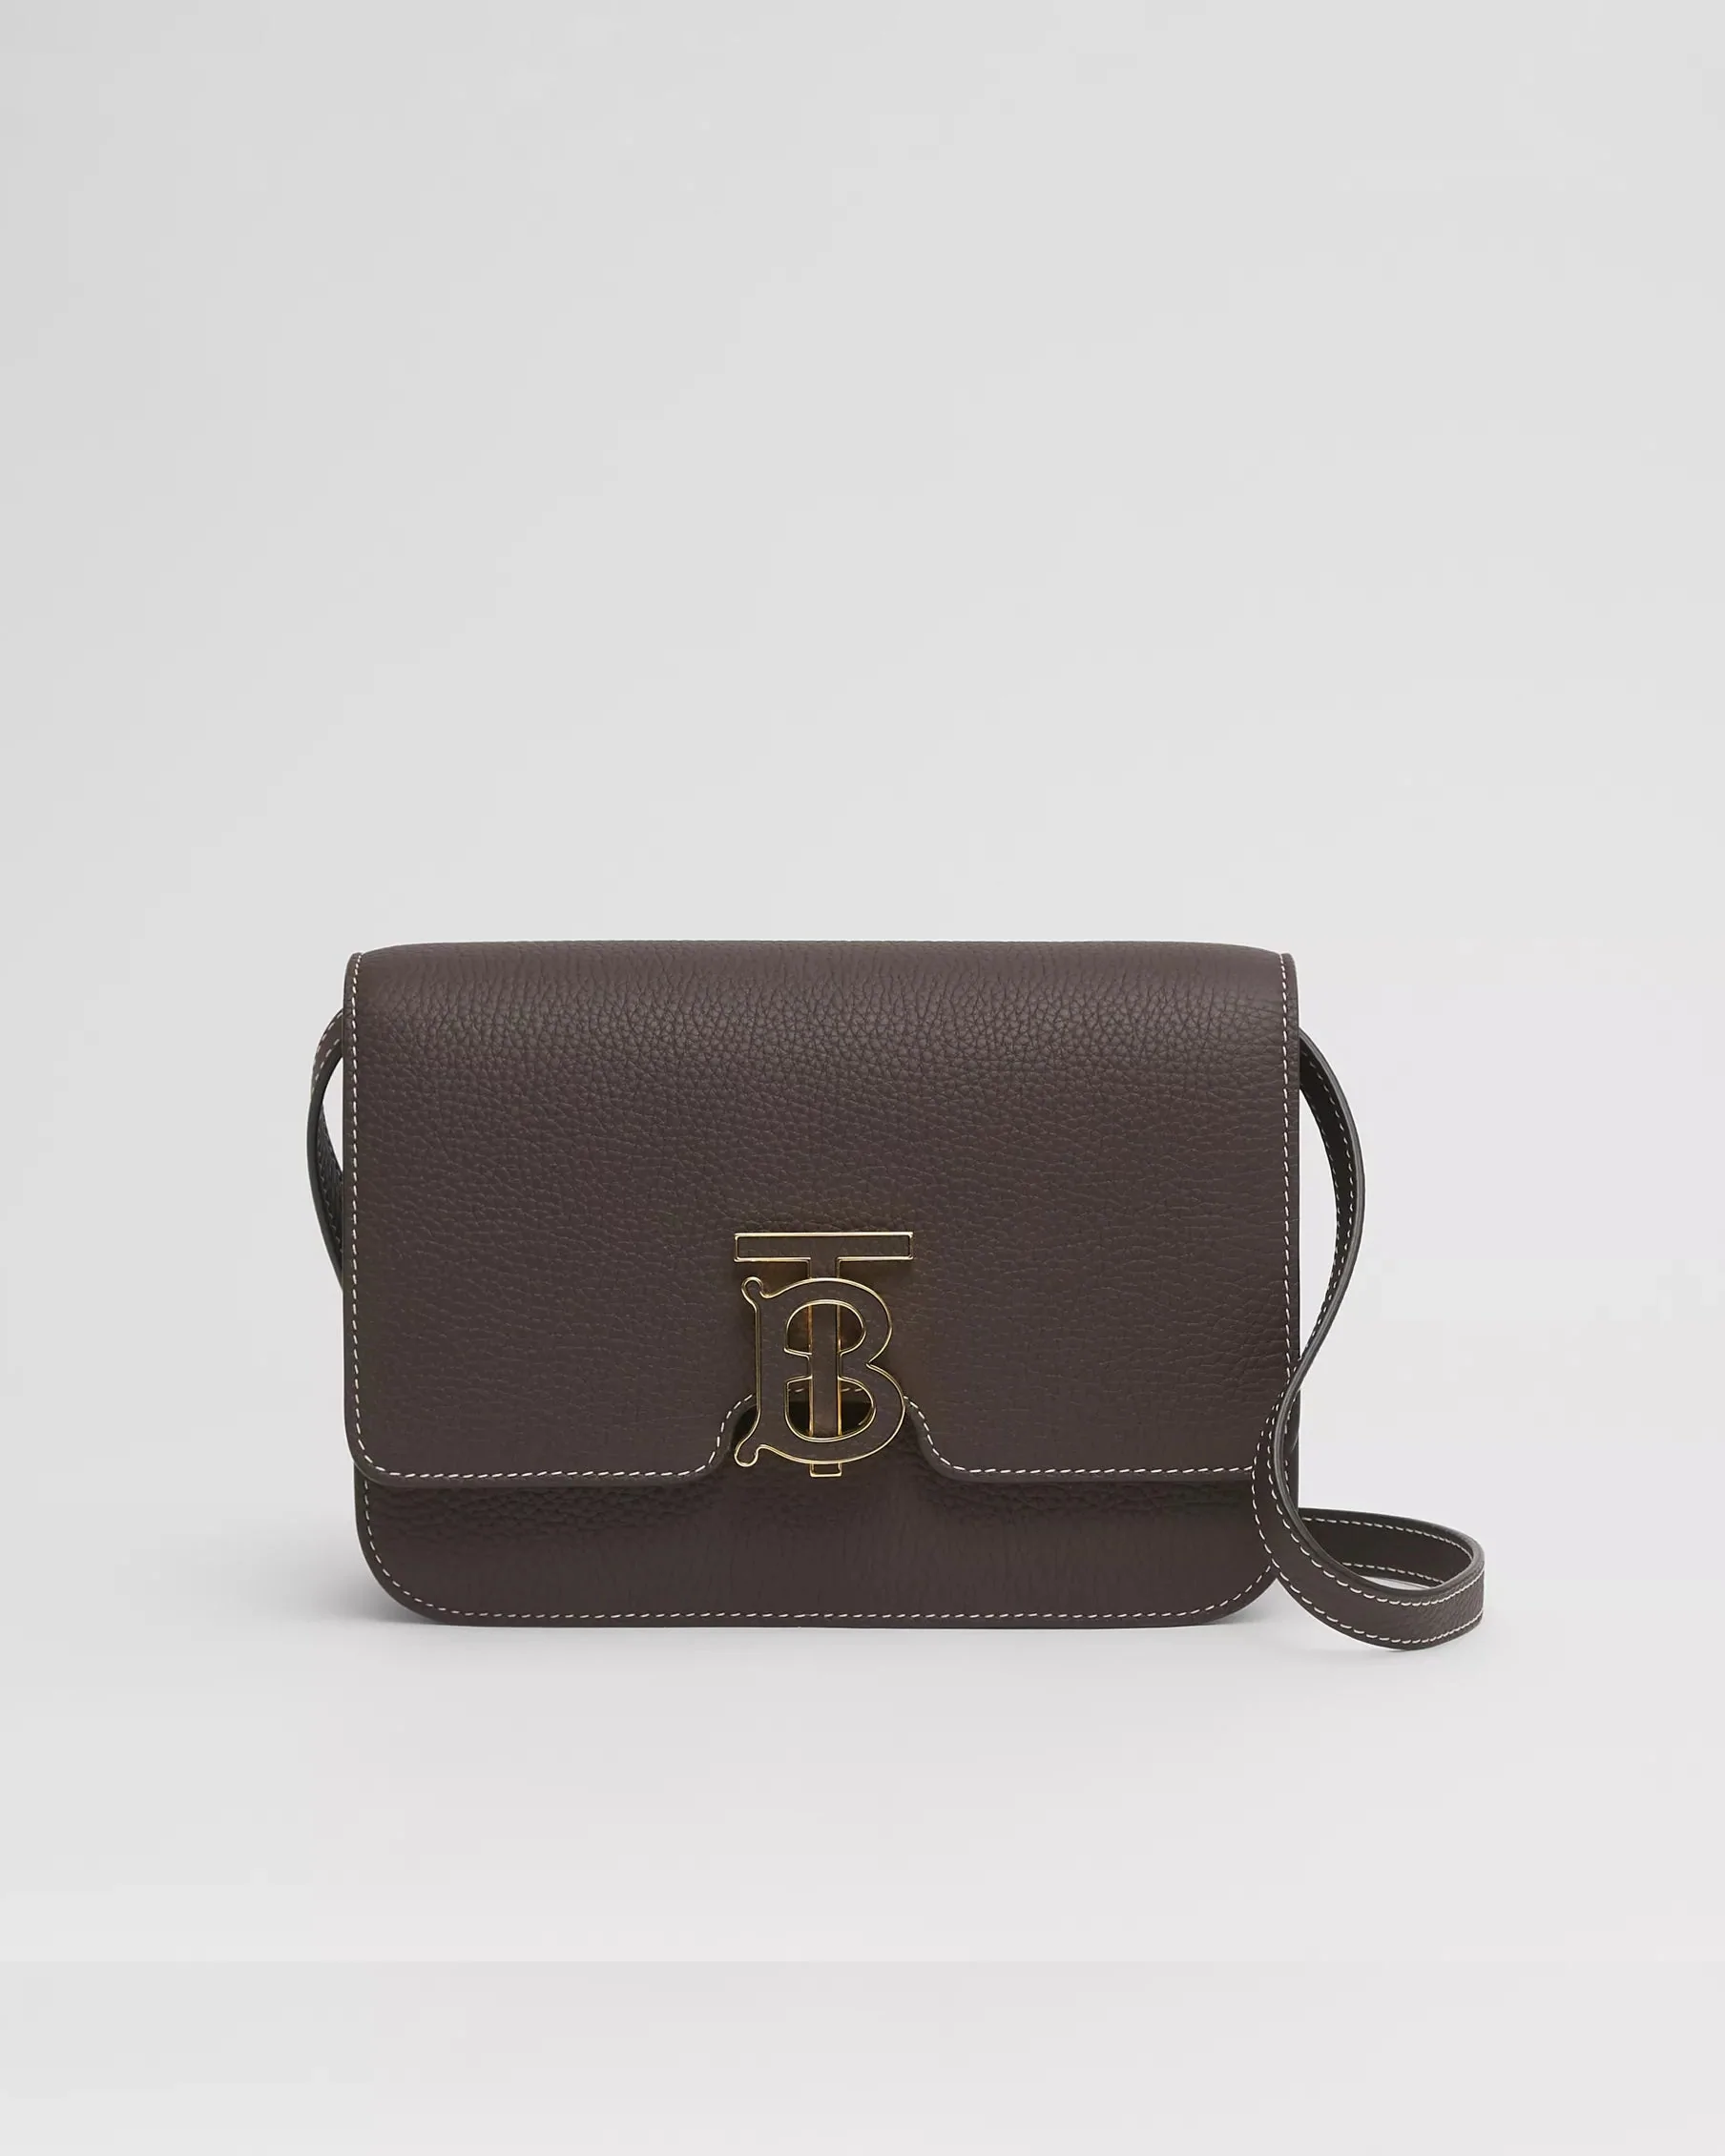 Burberry Topstitched Grainy Leather Small TB Bag